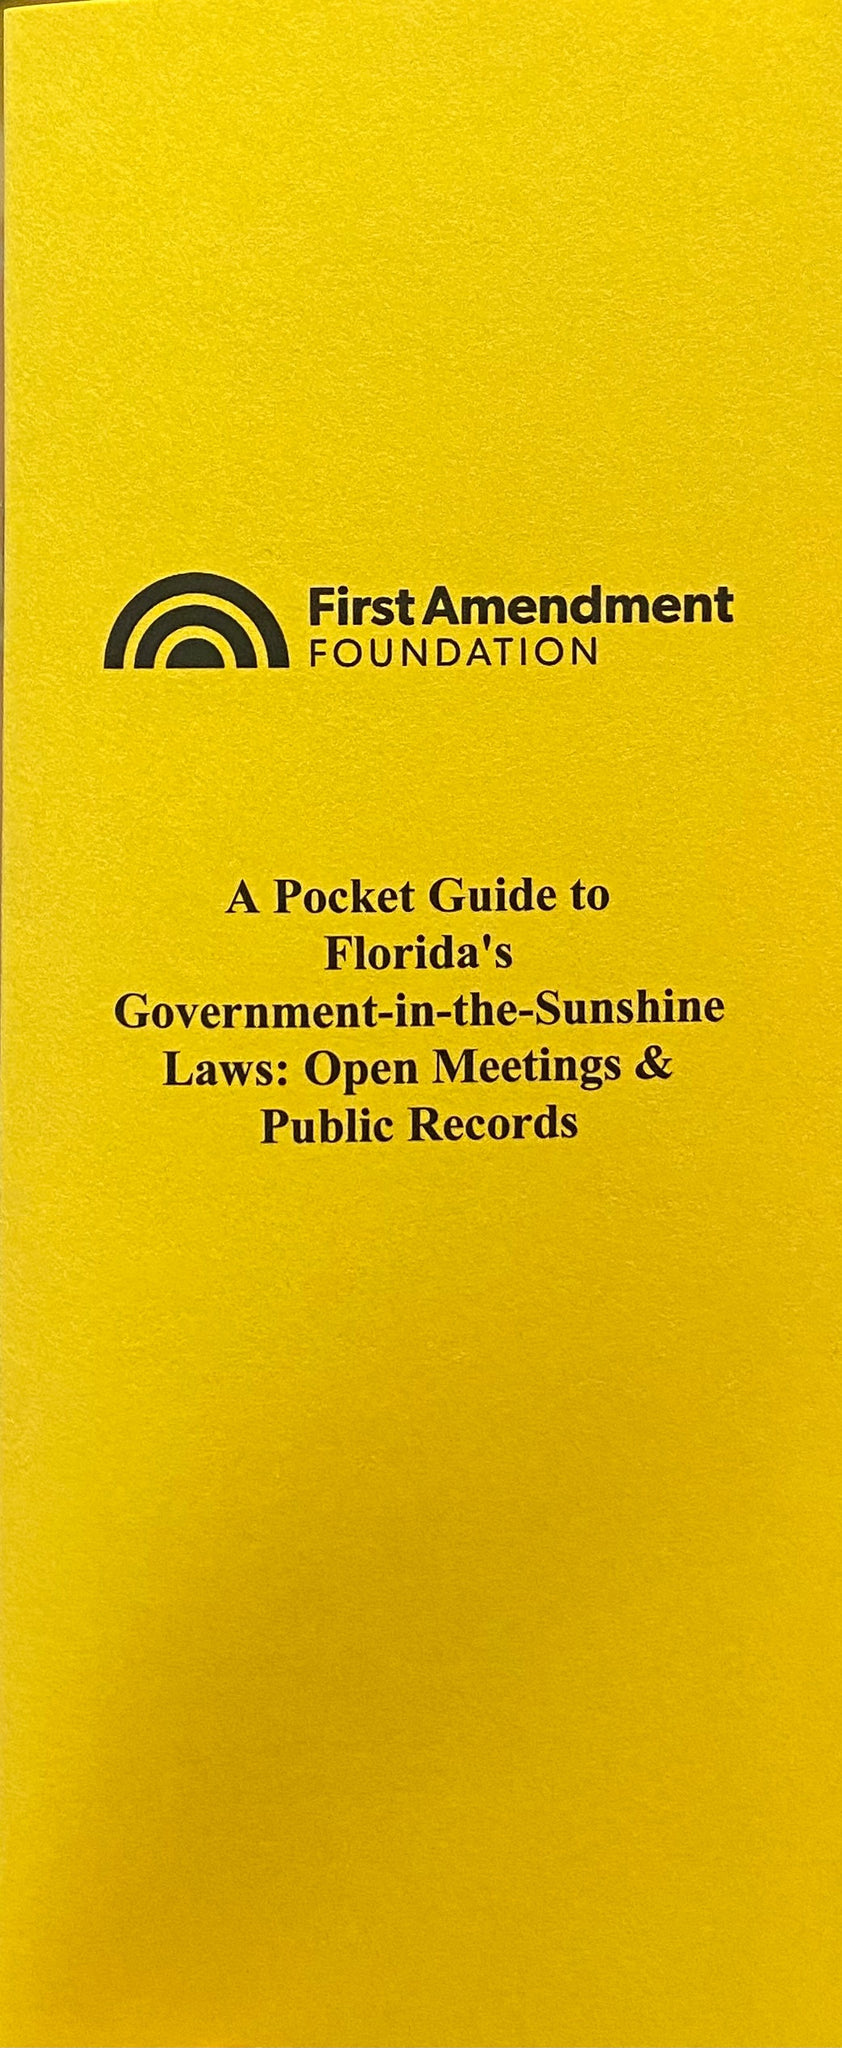 Pocket Guide (Taxable)